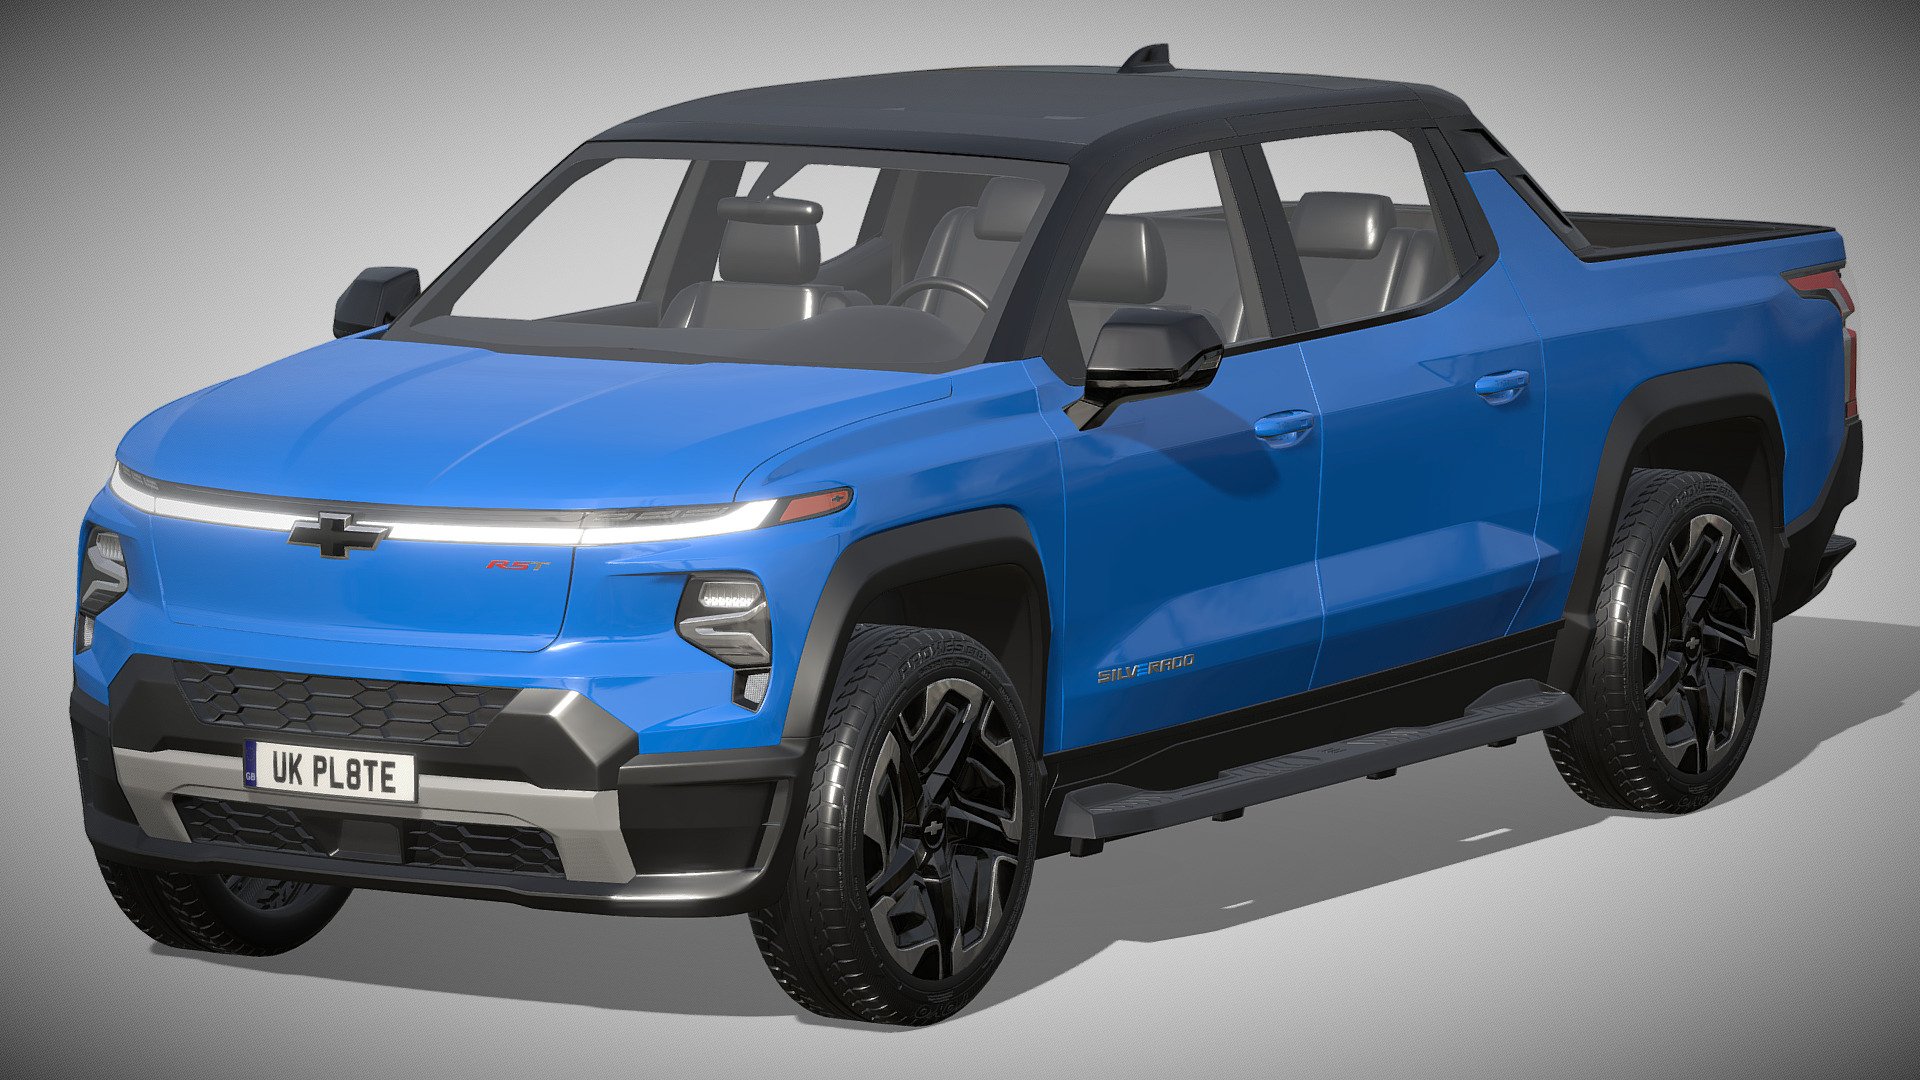 Chevrolet Silverado EV RST

https://www.chevrolet.com/electric/silverado-ev

Clean geometry Light weight model, yet completely detailed for HI-Res renders. Use for movies, Advertisements or games

Corona render and materials

All textures include in *.rar files

Lighting setup is not included in the file! - Chevrolet Silverado EV RST - Buy Royalty Free 3D model by zifir3d 3d model